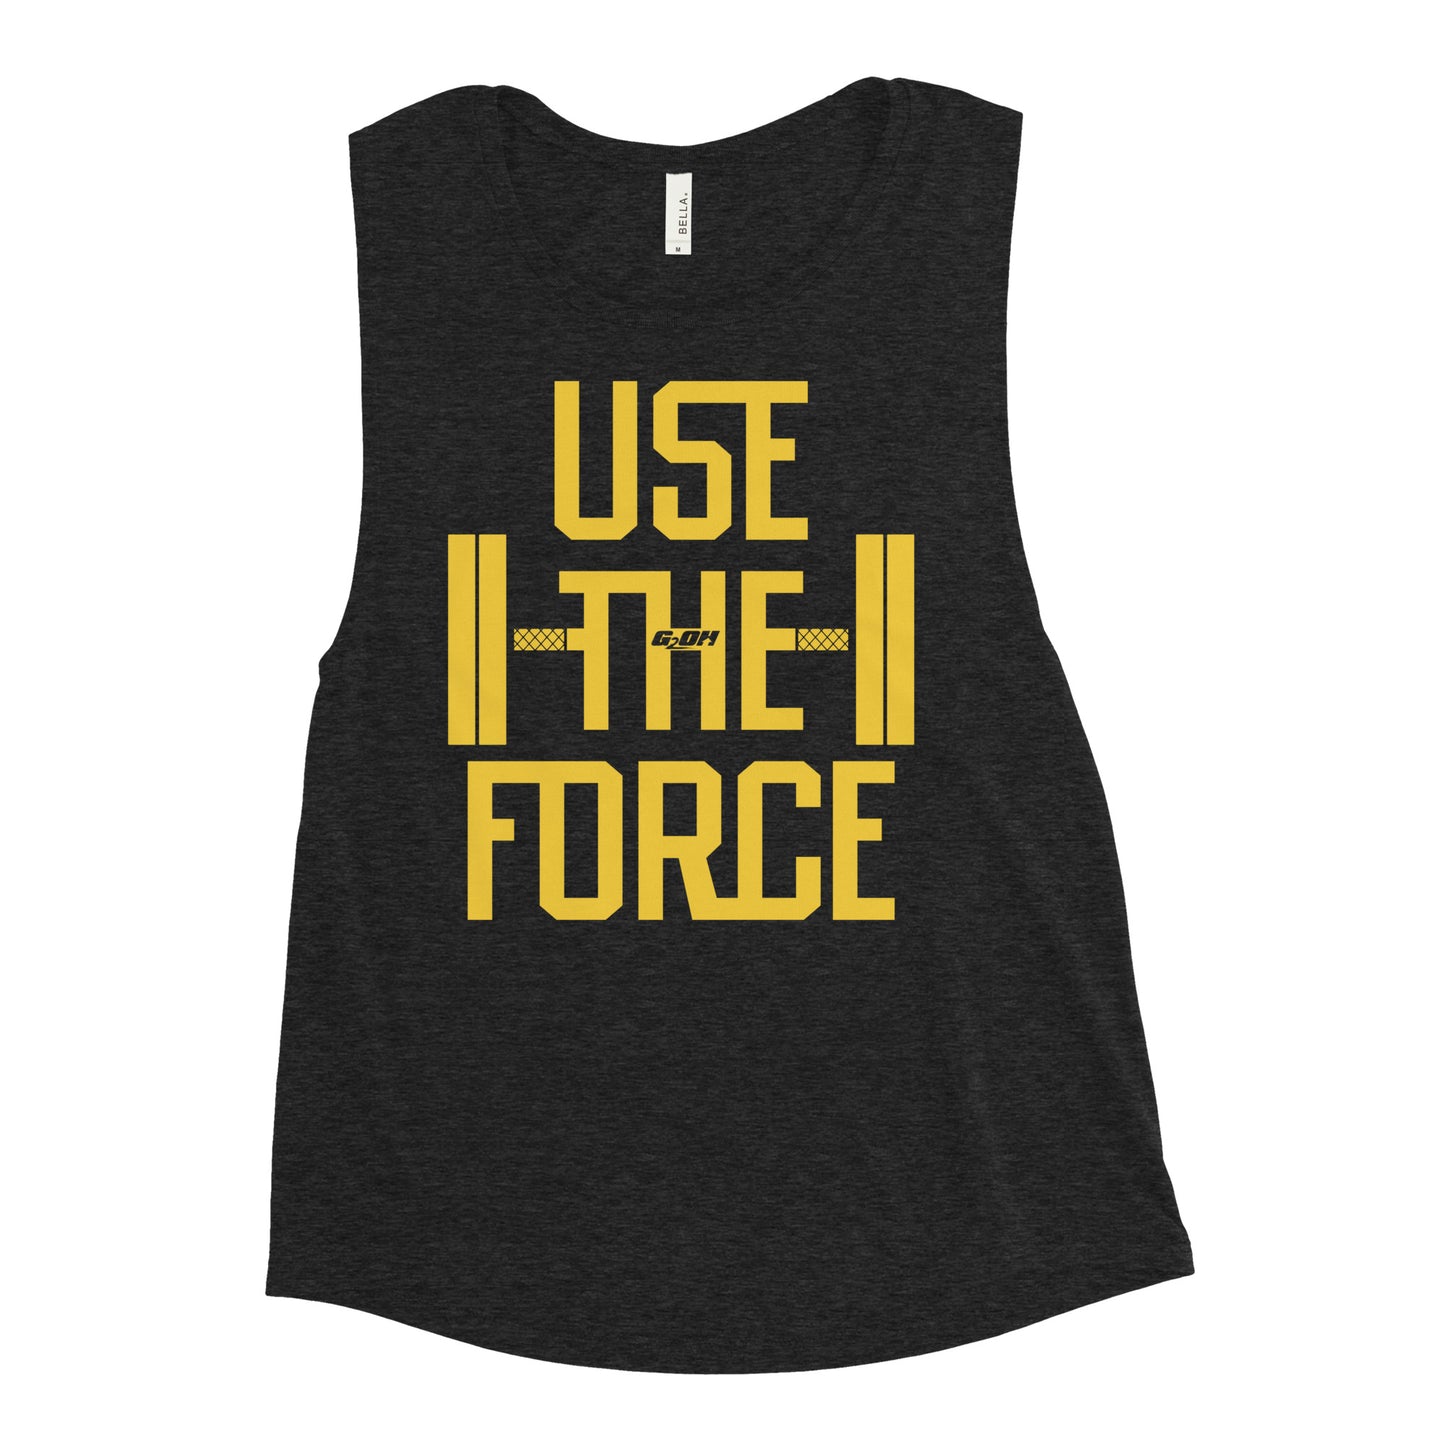 Use The Force Women's Muscle Tank